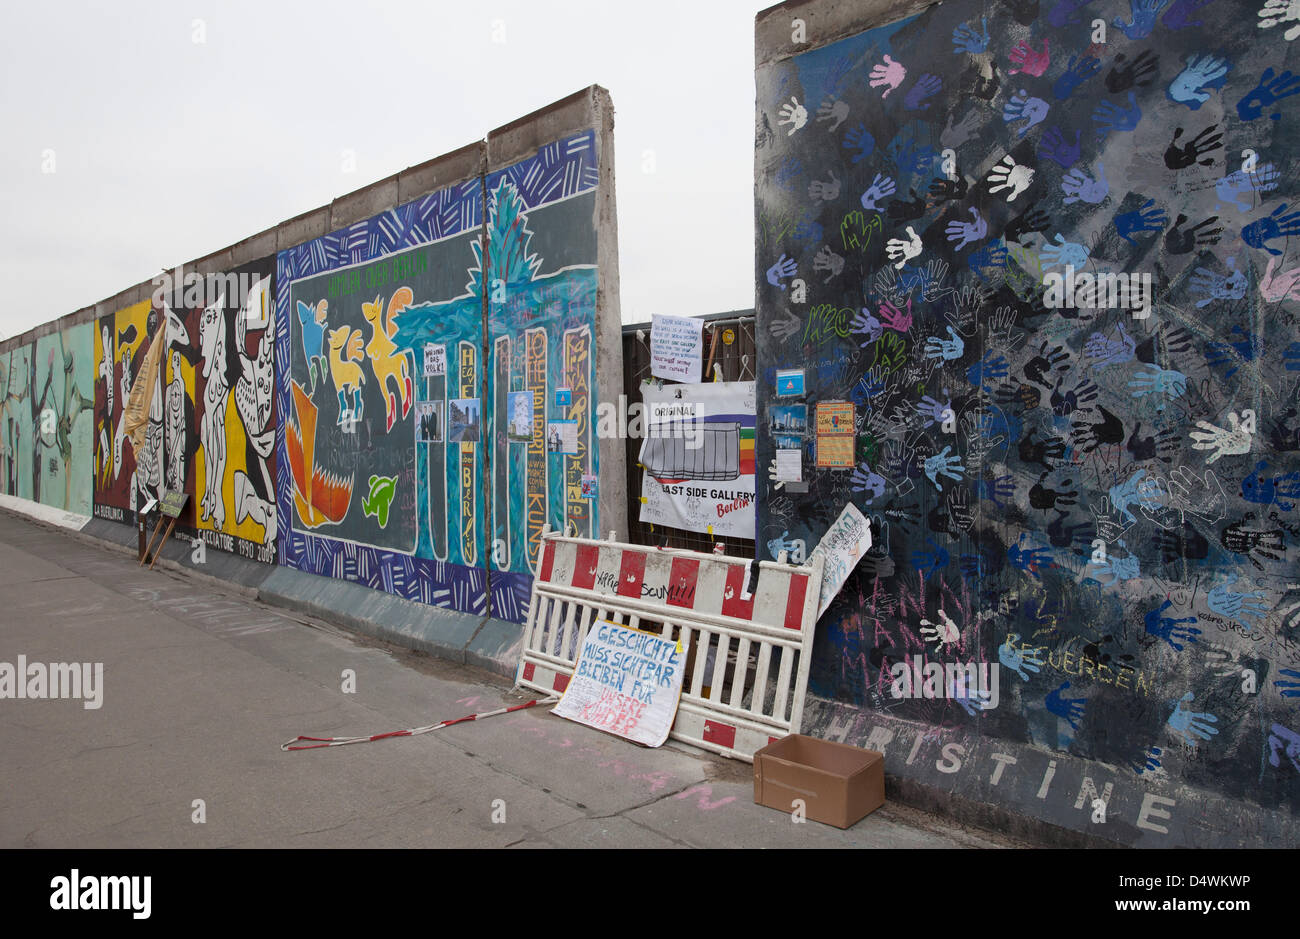 View of a part of the East Side Gallery in Berlin, Germany, 8 March 2013. The plan to  remove parts of the Berlin Wall at the East Side Gallery led to massive protests. A 22-meters-wide part of the landmarked section of the Wall was supposed to be removed to enable access to the riverside where a tall buidling will be built. A part of the Wall was already removed - posters and banners mark the empty space in-between the Wall pieces. Investor and the City Council of Berlin have announced they will look for alternative solutions to save most parts of the Wall. Photo: Andreas Franke Stock Photo